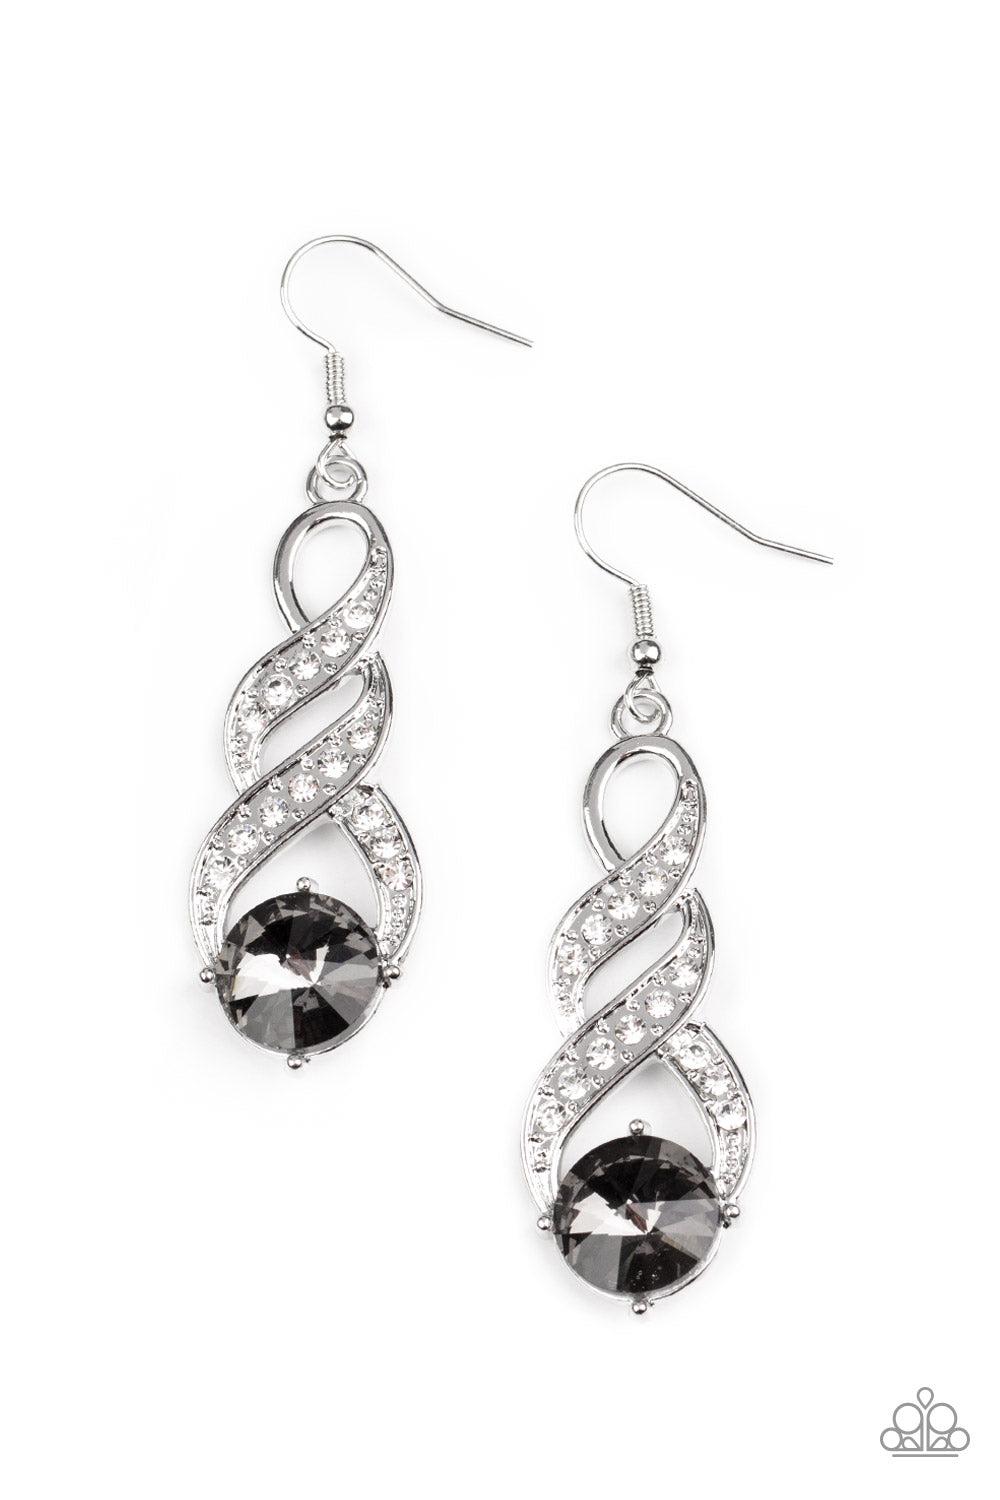 High-Ranking Royalty Silver Rhinestone Earrings - Paparazzi Accessories- lightbox - CarasShop.com - $5 Jewelry by Cara Jewels